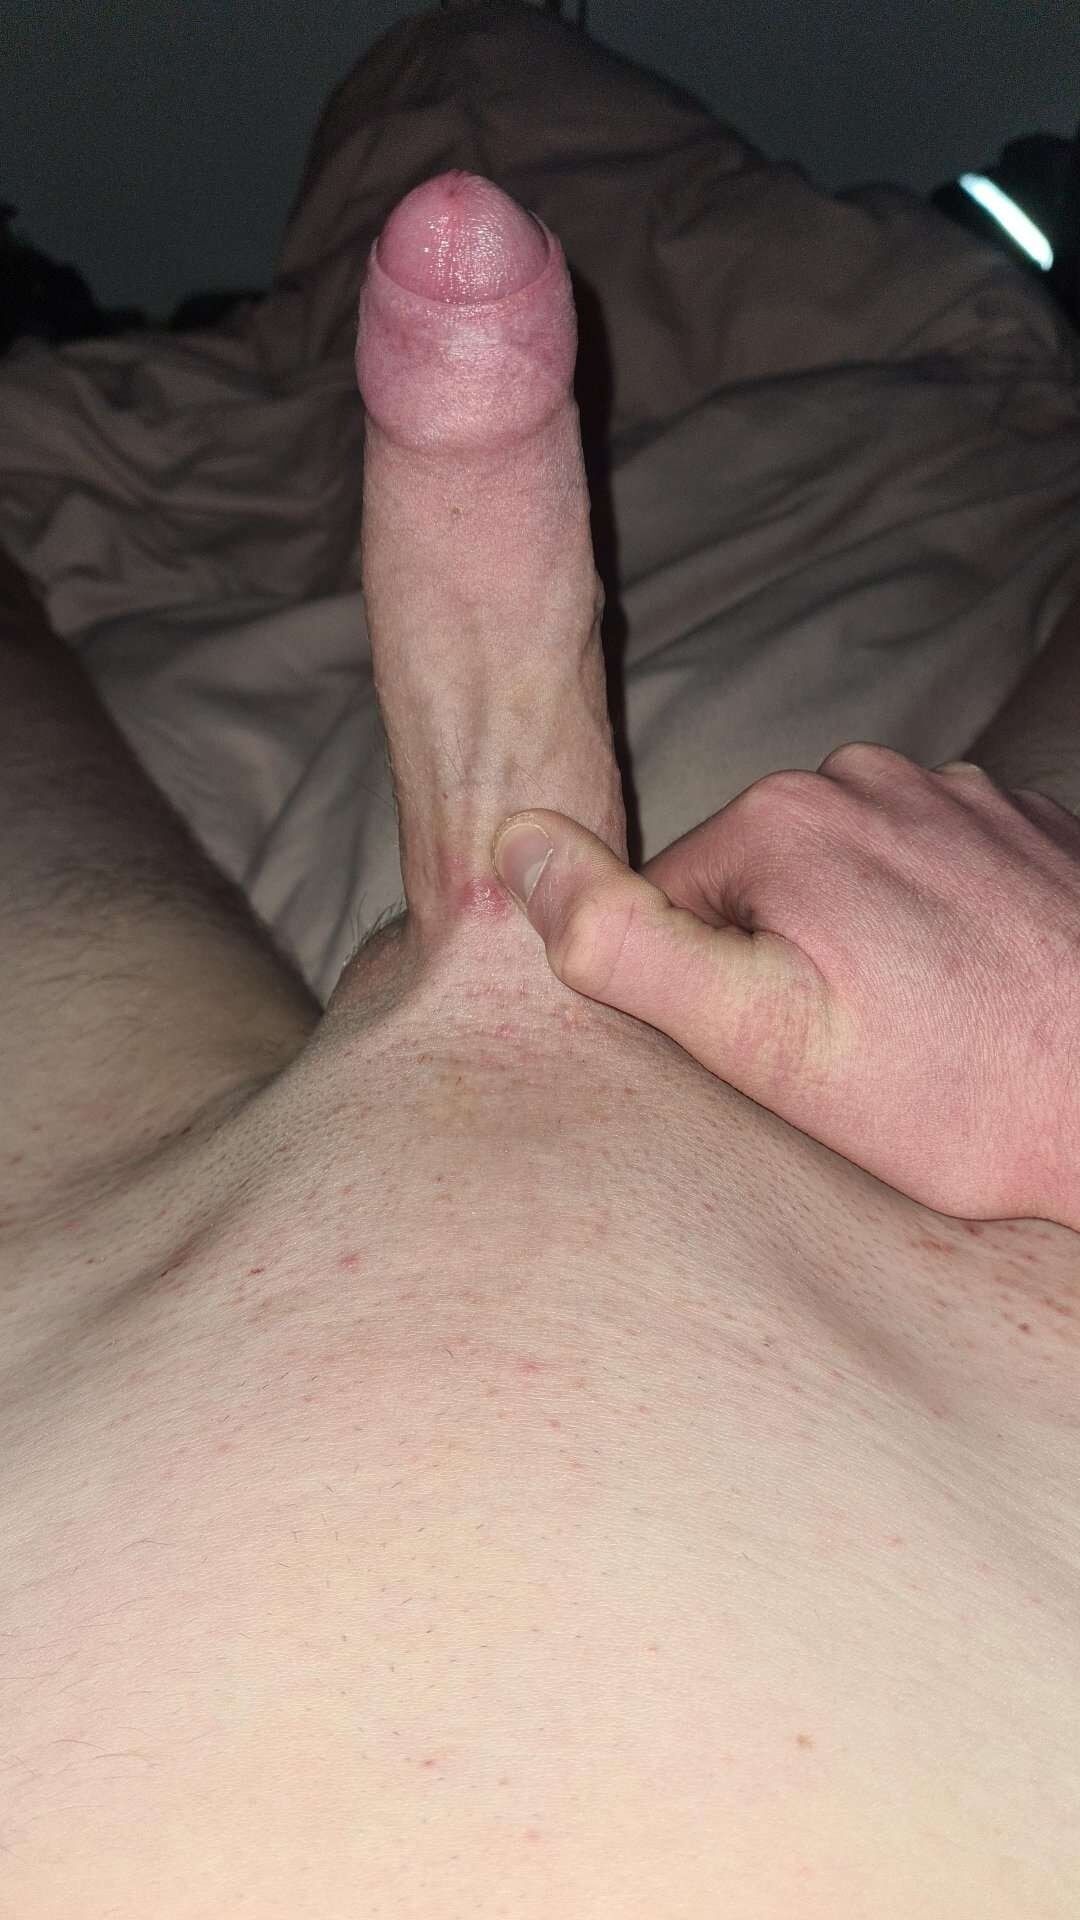 my cock 2